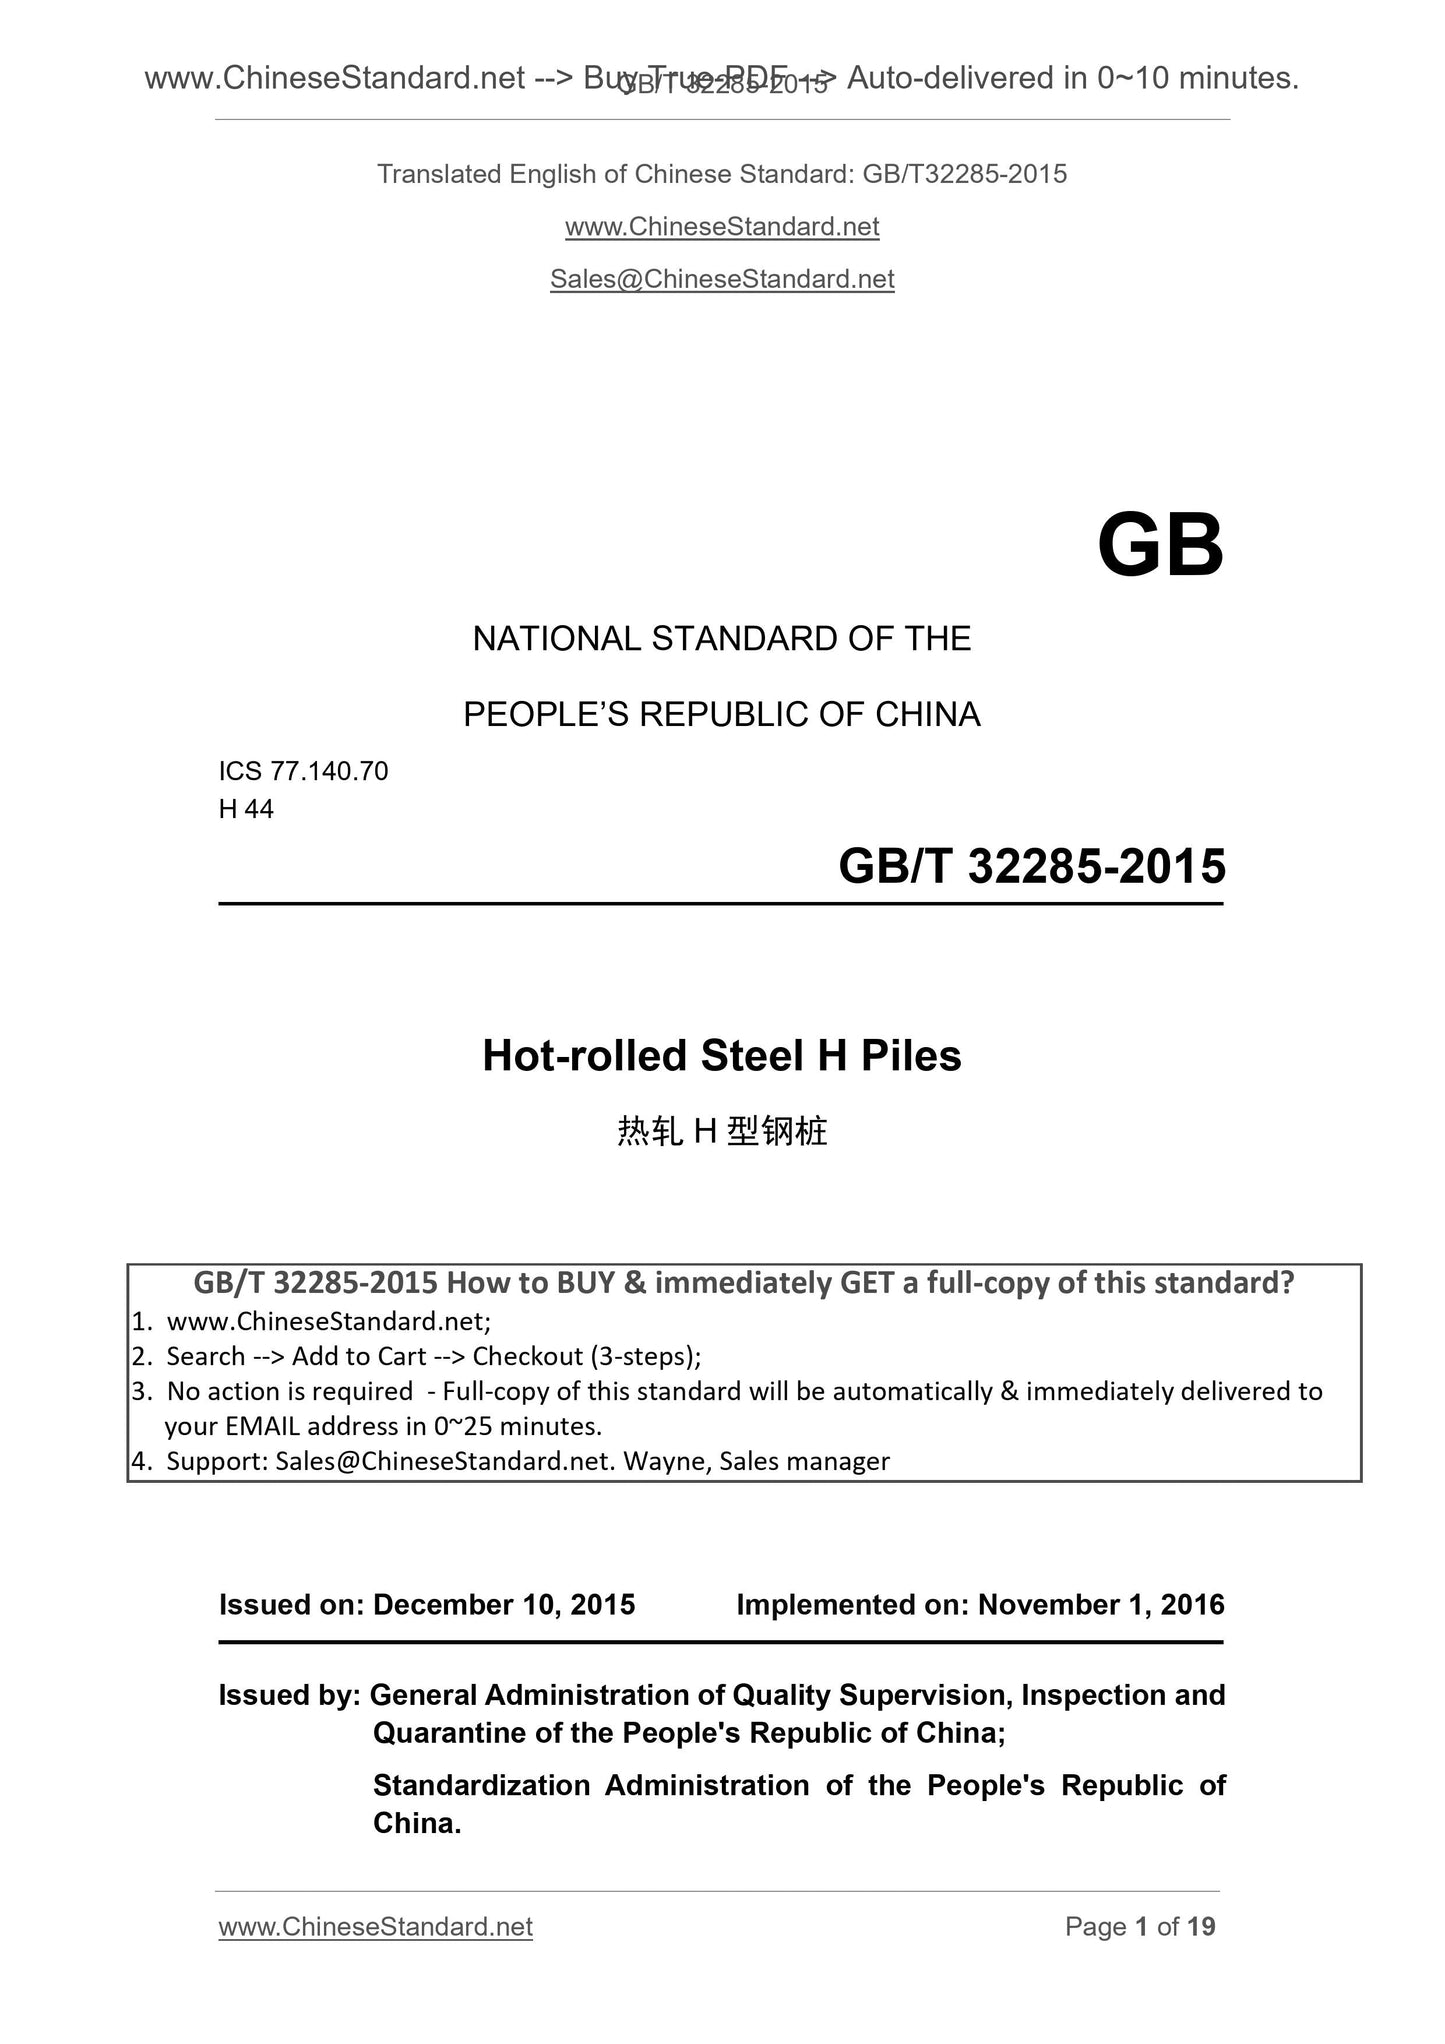 GB/T 32285-2015 Page 1